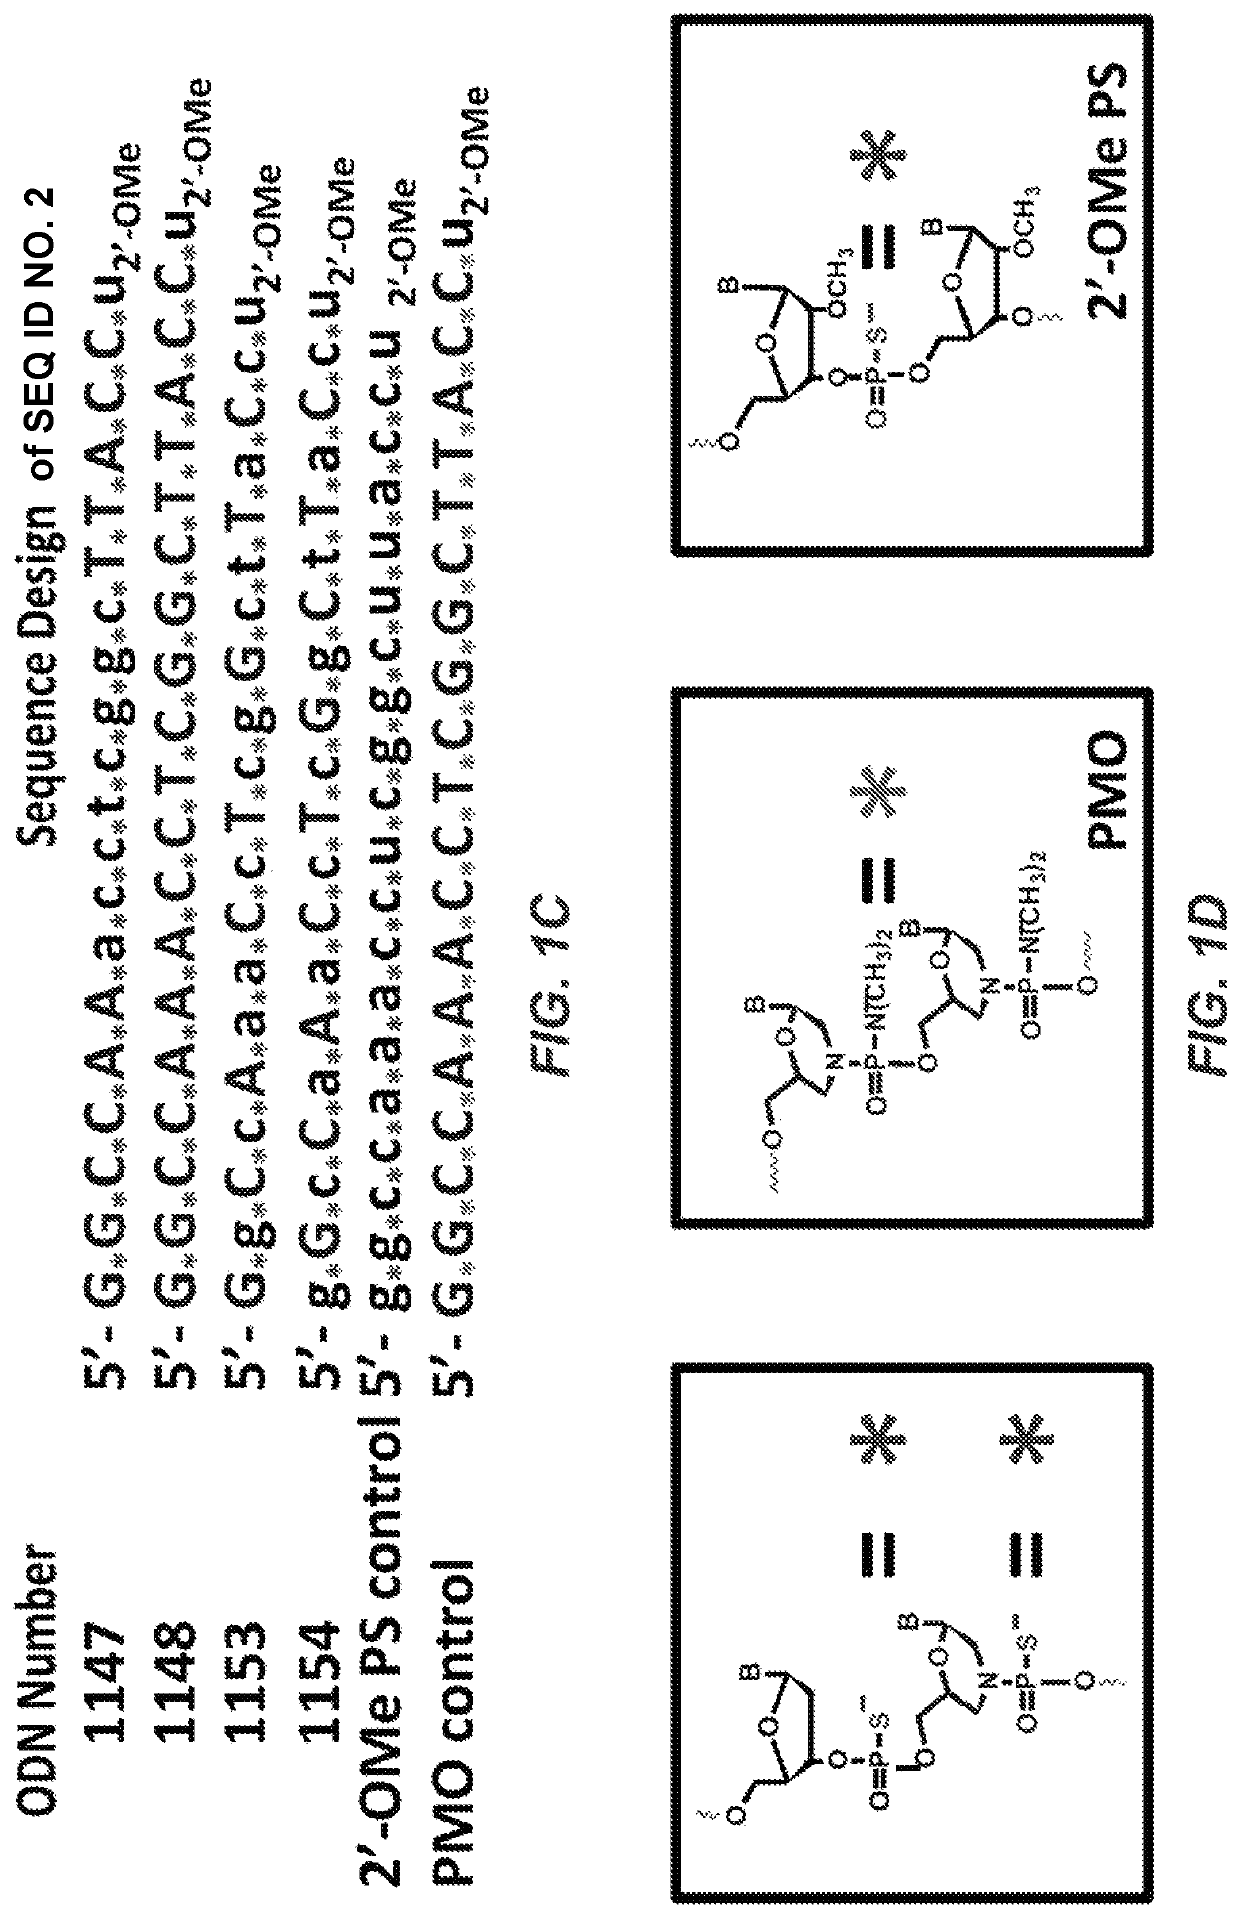 Thiomorpholino oligonucleotides for the treatment of muscular dystrophy